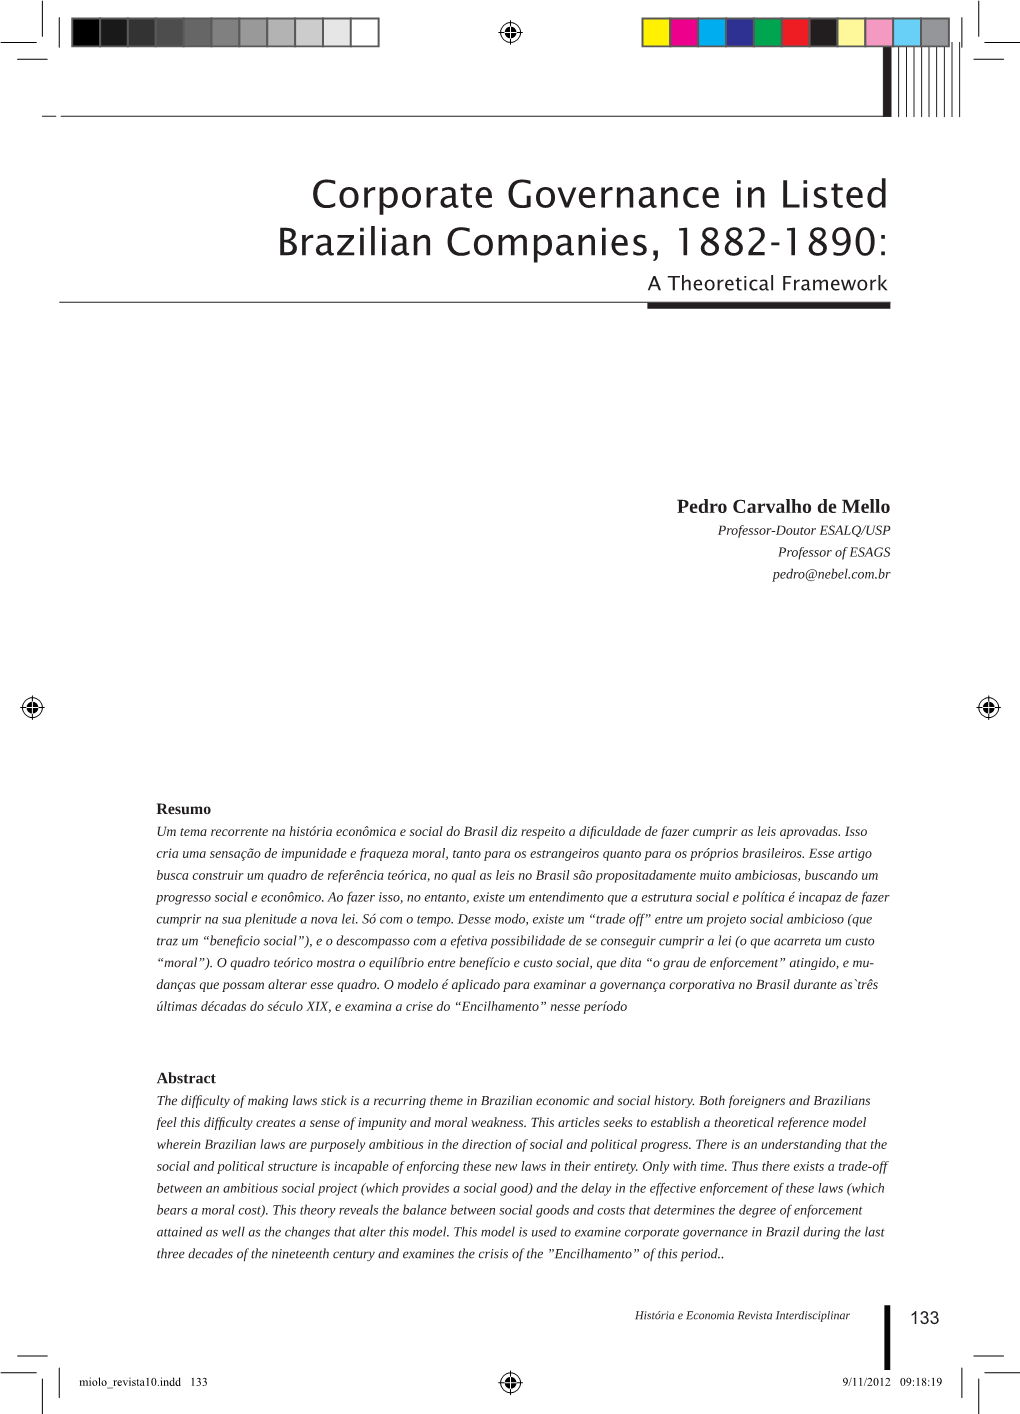 Corporate Governance in Listed Brazilian Companies, 1882-1890: a Theoretical Framework